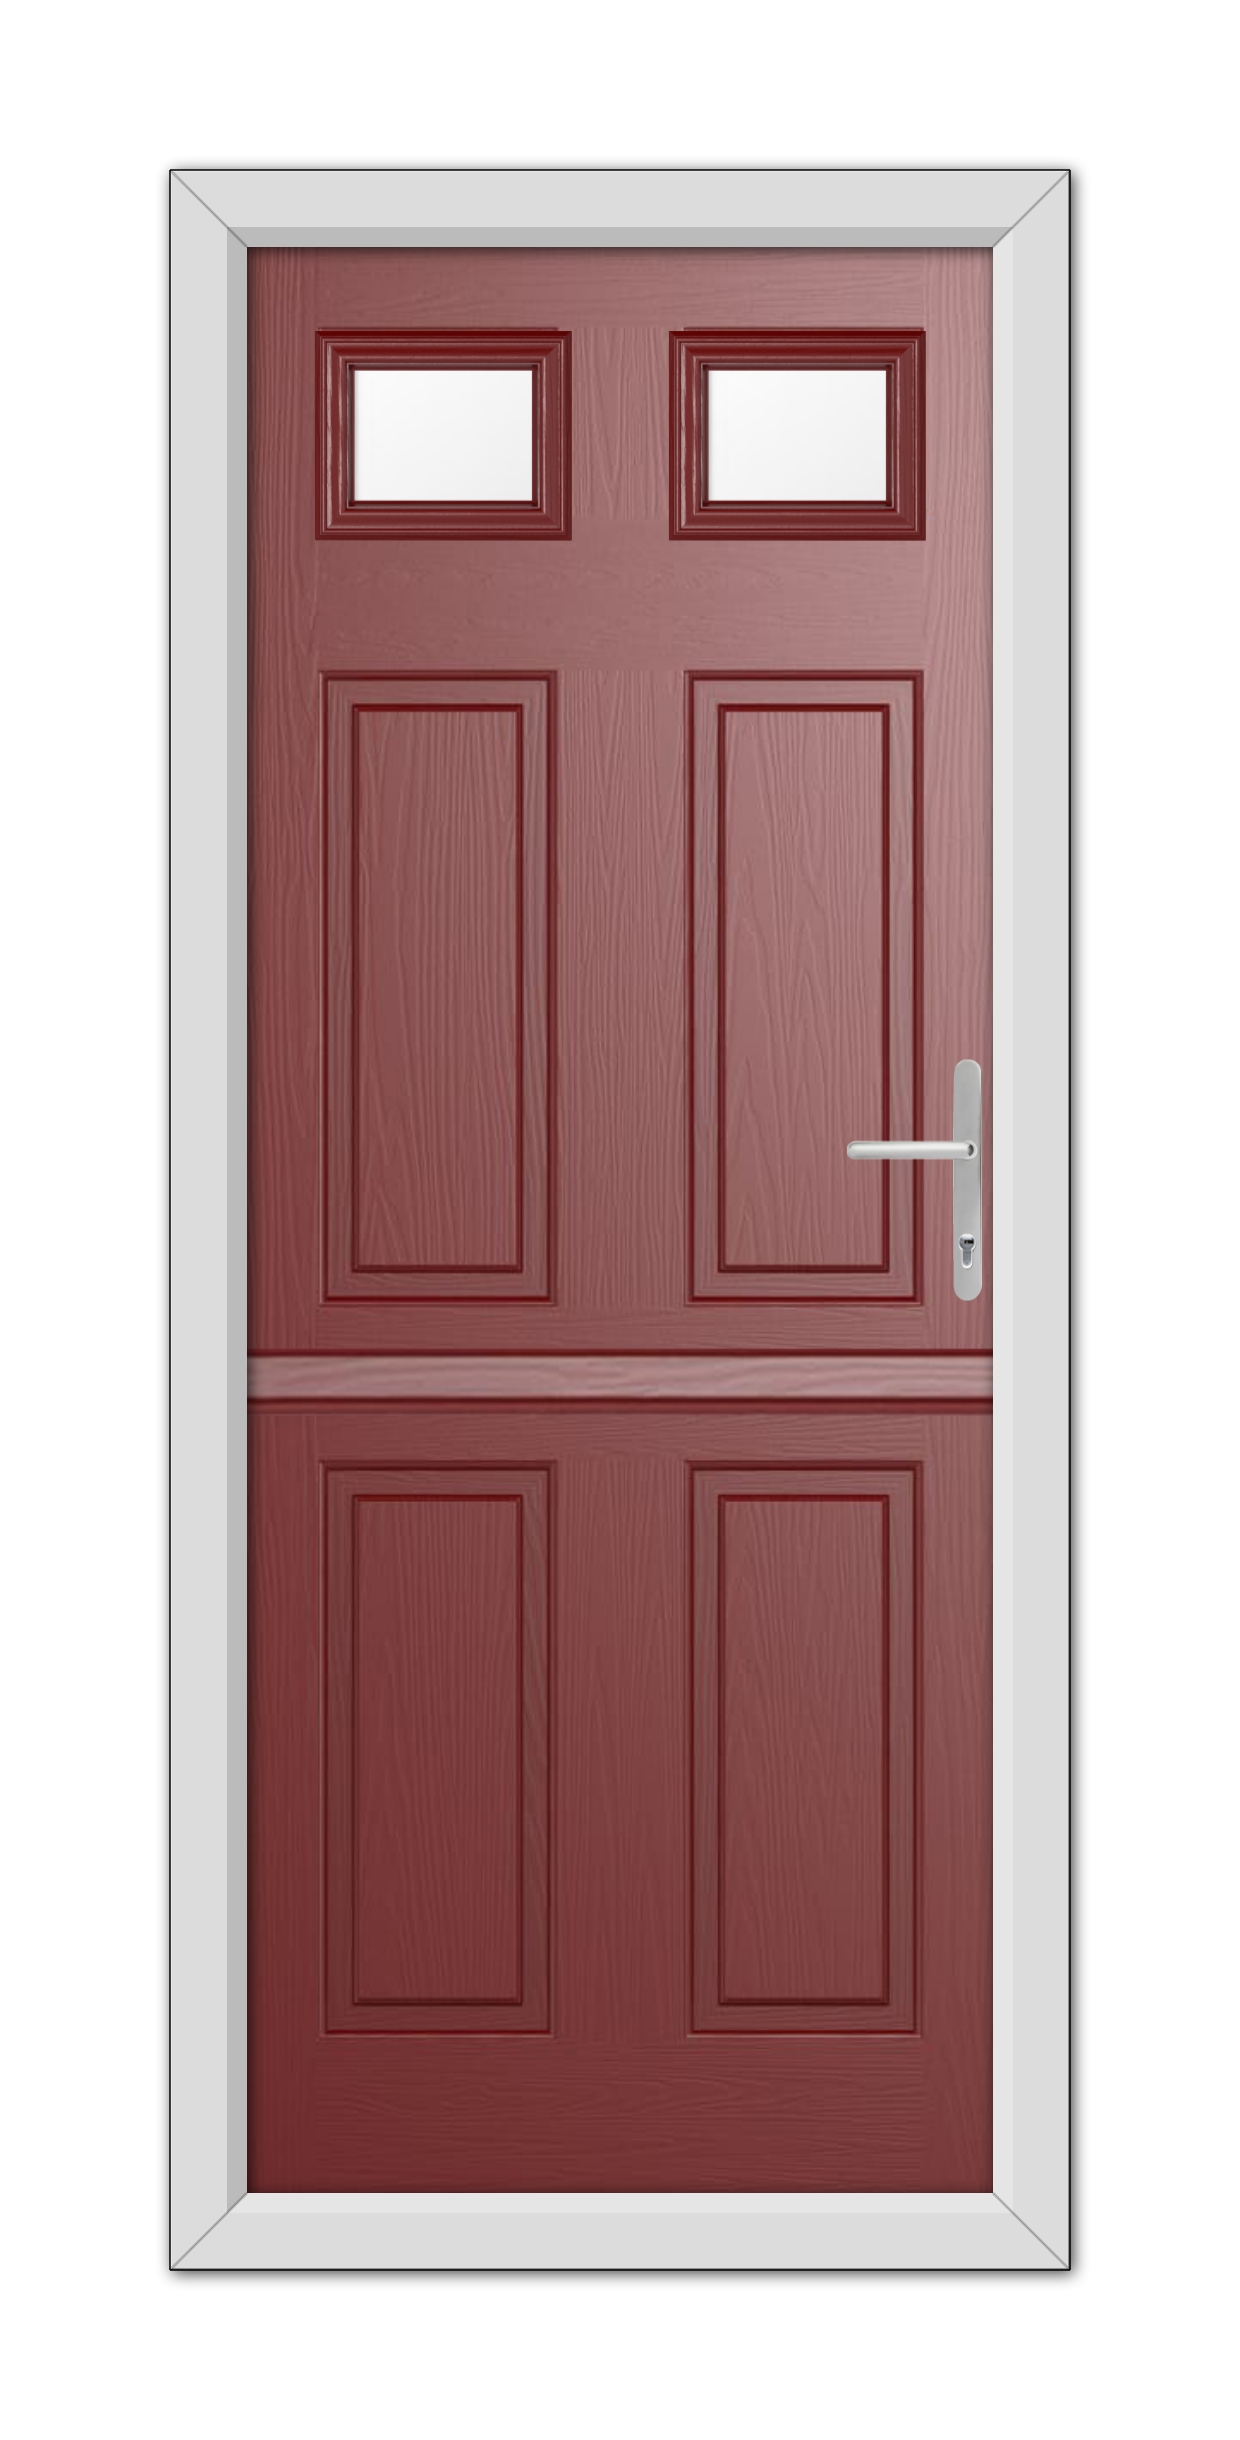 A modern Red Middleton Glazed 2 Stable Composite Door 48mm Timber Core with four panels and three small square windows, framed in white, featuring a silver handle on the right side.